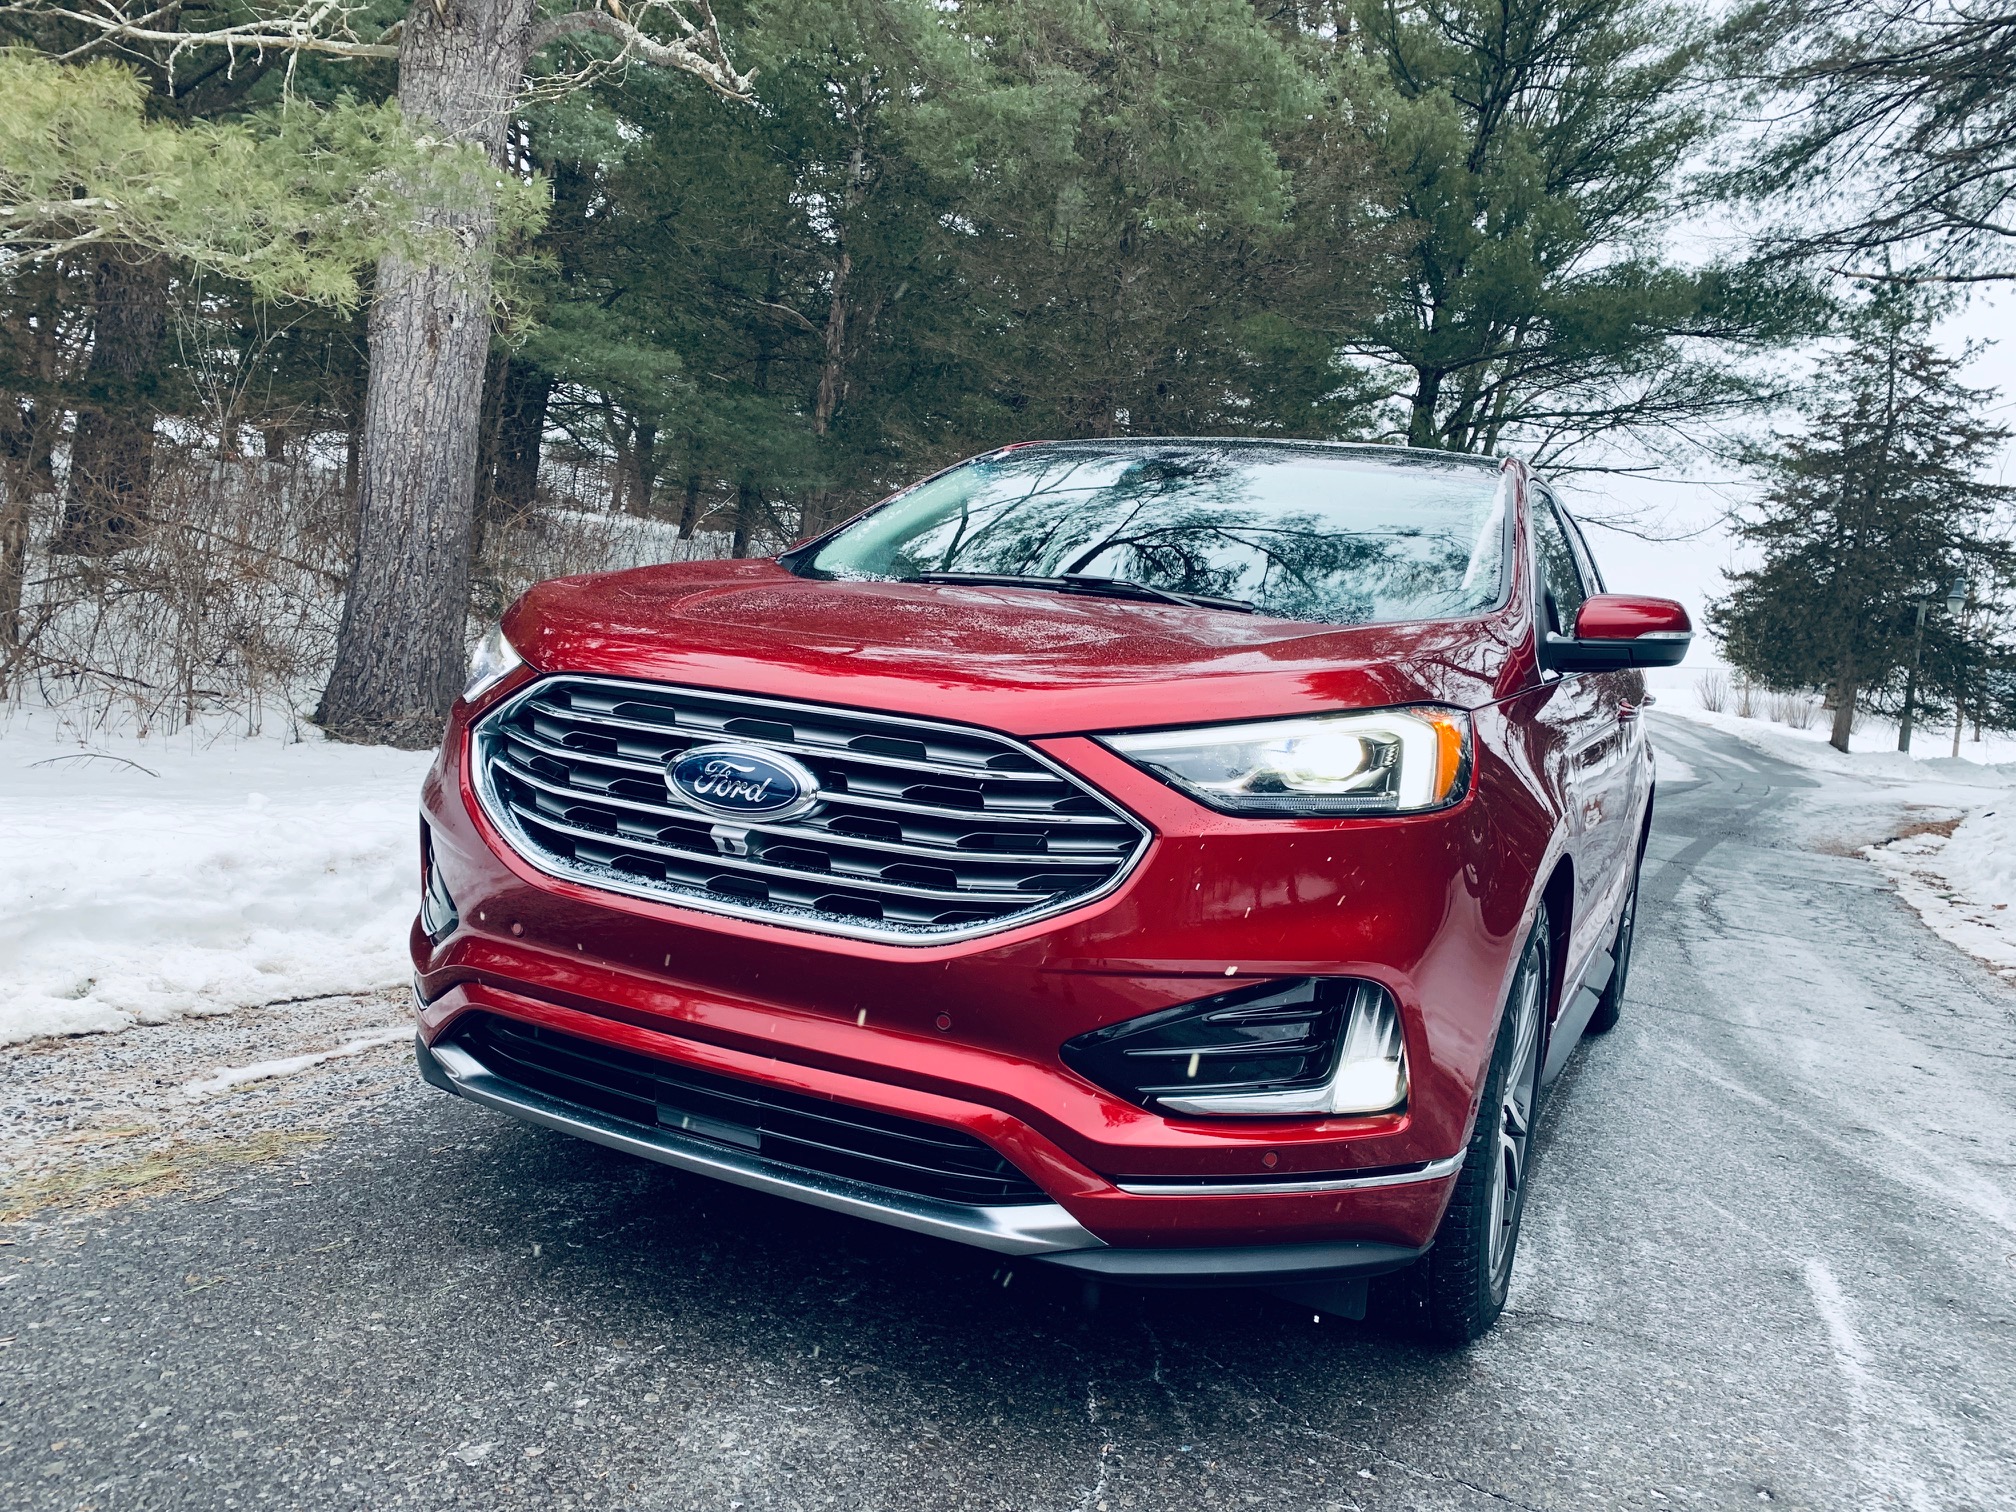 2019 FORD EDGE REVIEW BY AUTO CRITIC STEVE HAMMES